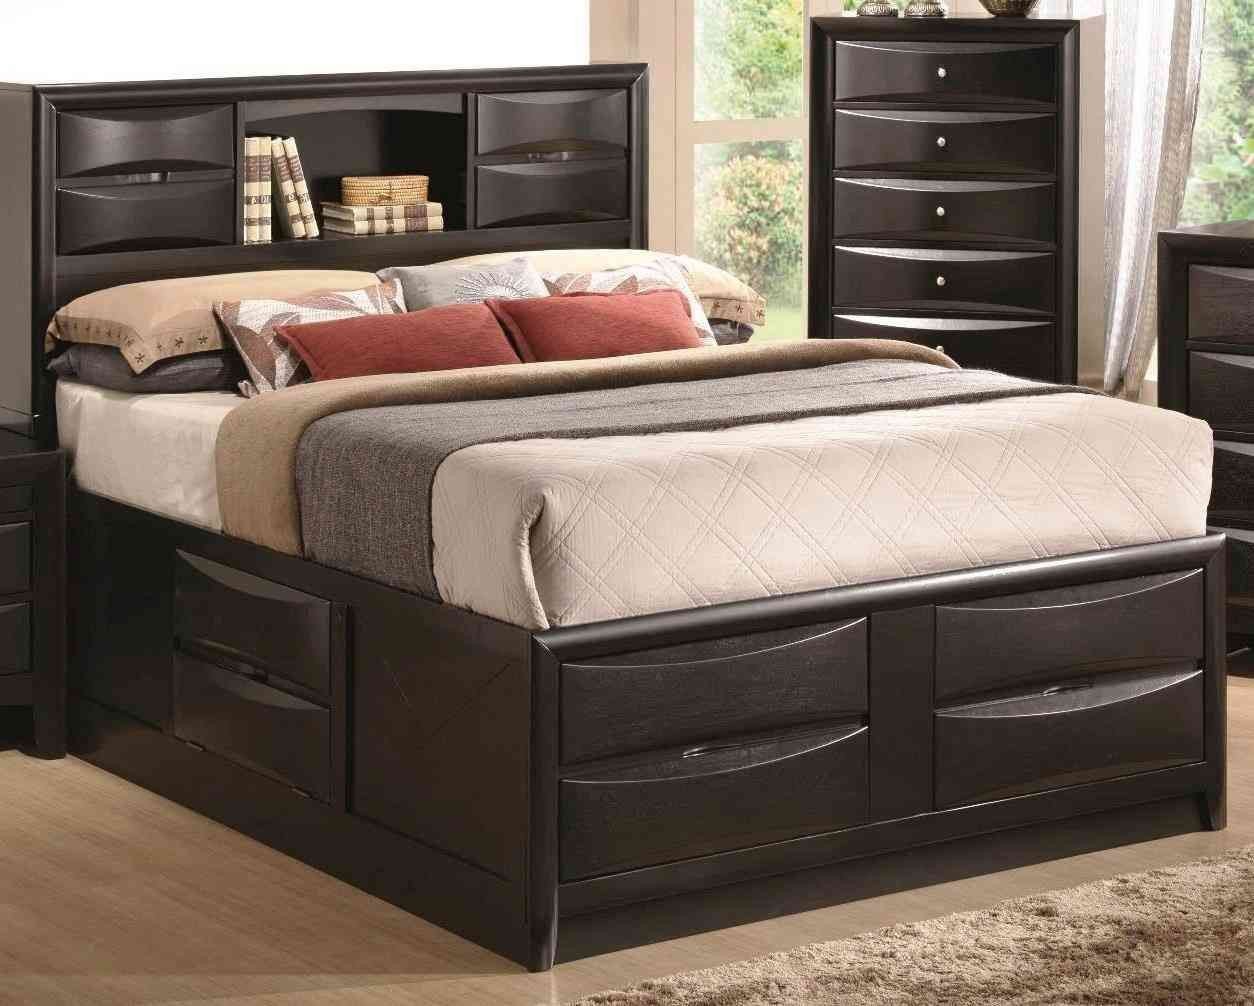 Big Lots Bedroom Furniture Best Of Bedroom King Size Bed with Black Color and Has A Storage